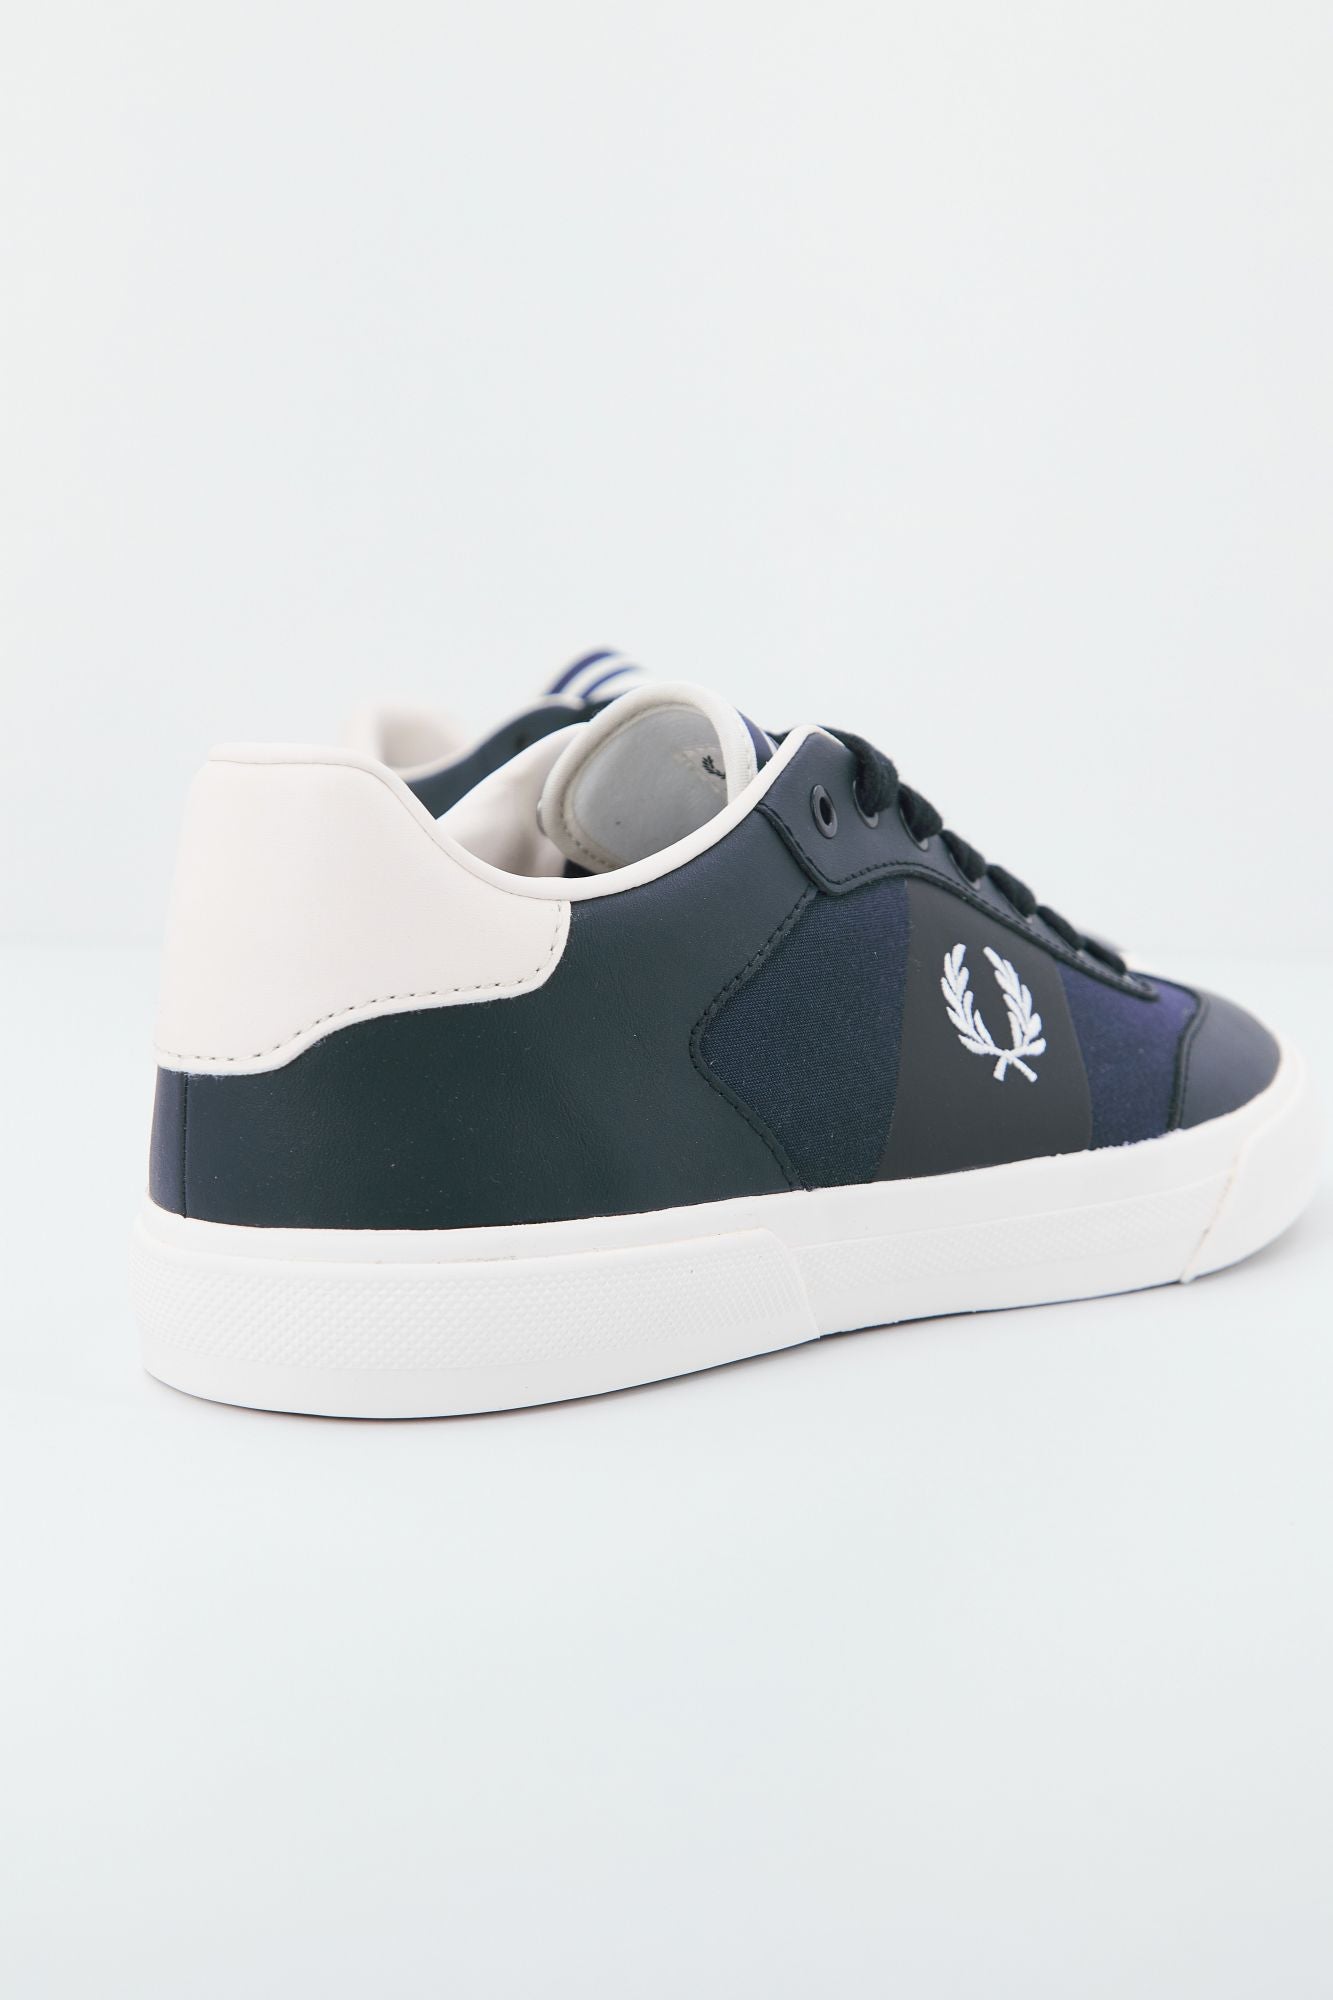 FRED PERRY CLAY LEATHER en color AZUL (3)